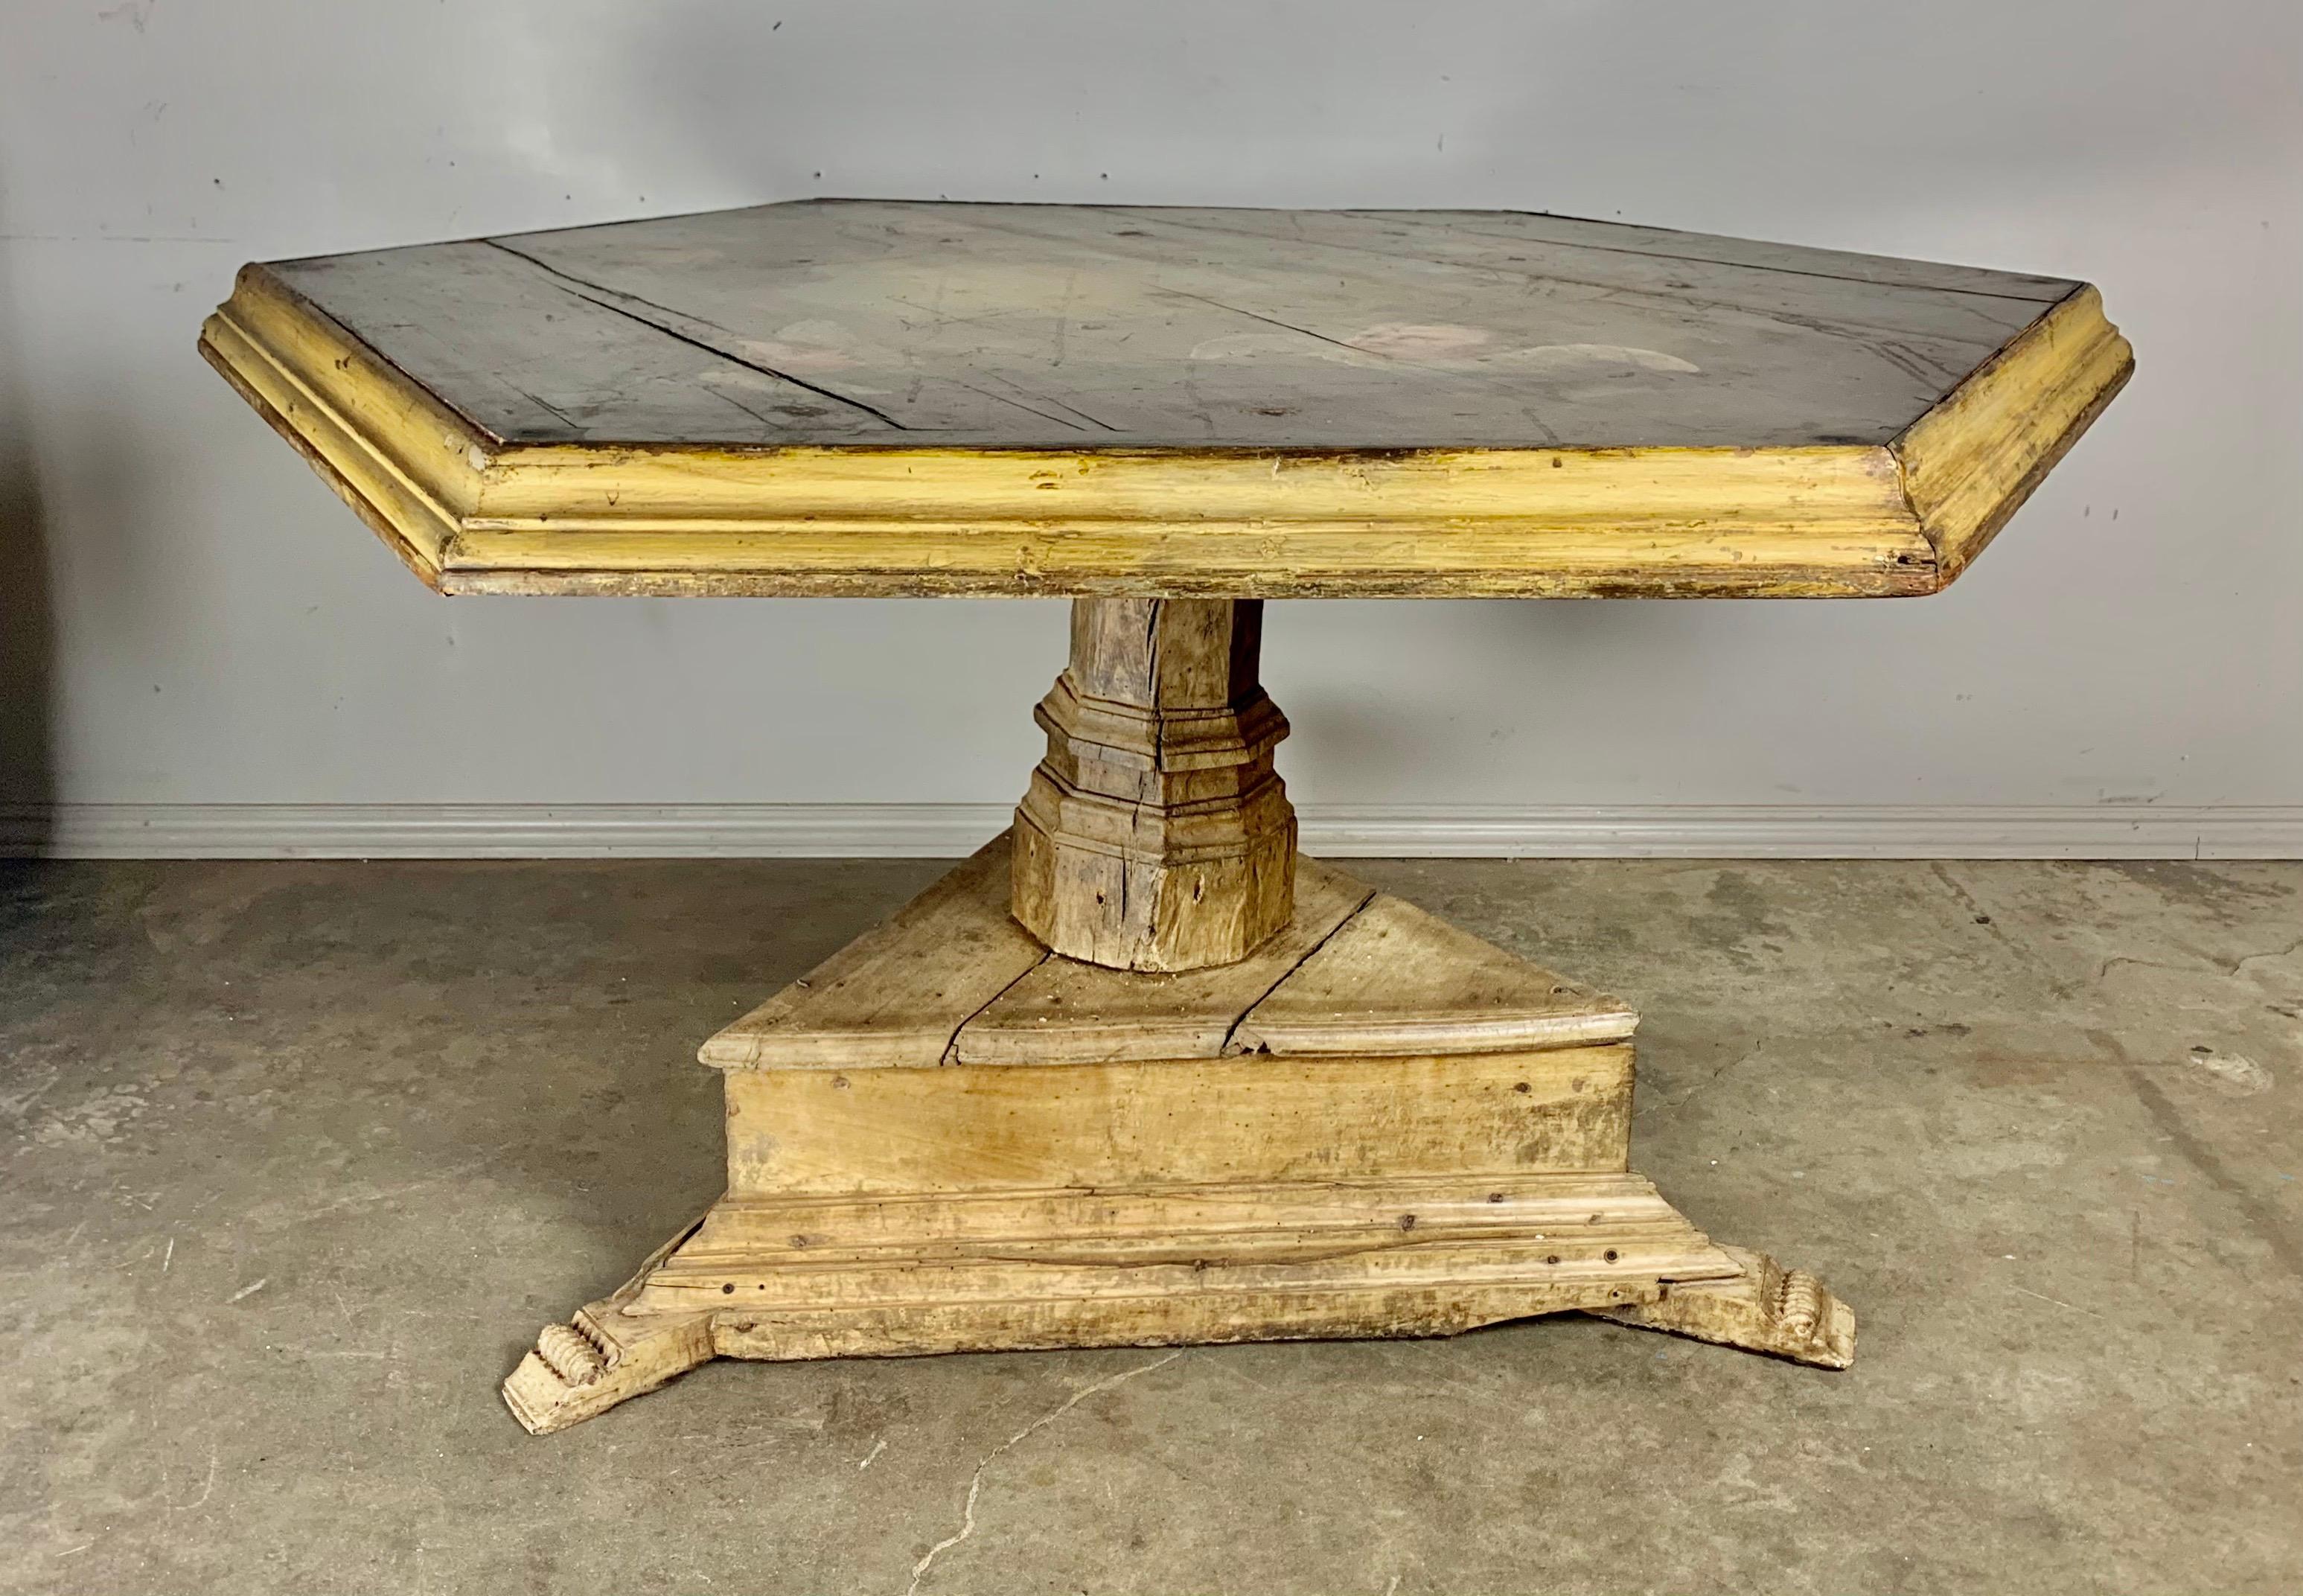 Unique 19th century Spanish painted pedestal table. The six sided top is decorated with five finely painted cherubs throughout. The top is supported by a triangular pedestal base that stands on three carved feet. The finish is distressed with worn